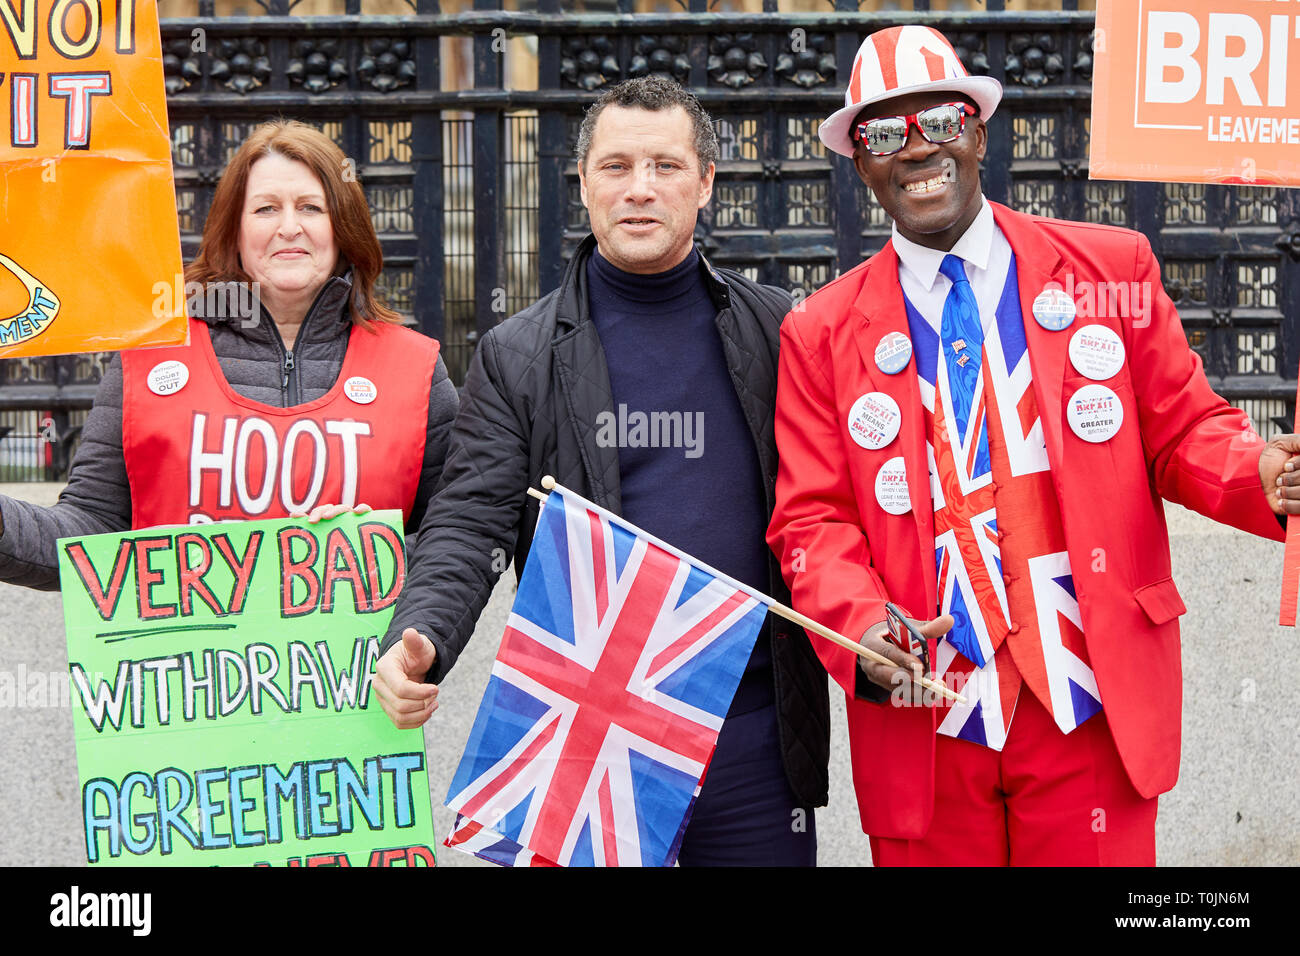 London, UK. - March 20, 2019: Steven Woolfe, MEP joins Leave supporters campaigning outside Parliament. Credit: Kevin J. Frost/Alamy Live News Stock Photo